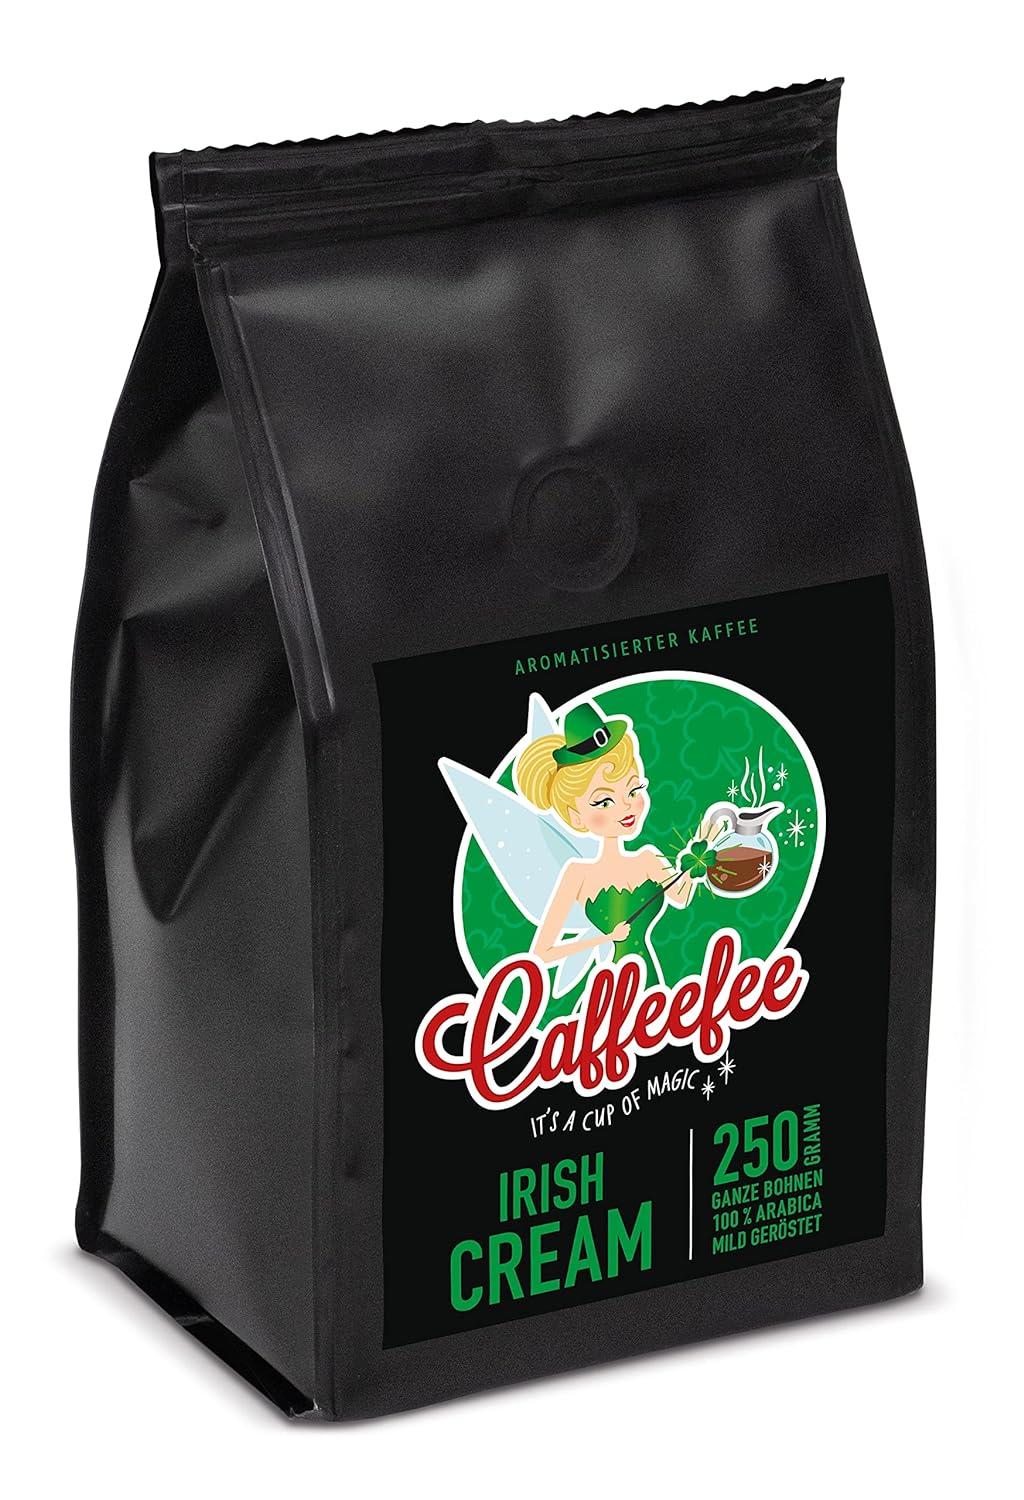 Caffeefee Irish Cream Whole Beans, Flavored Roasted Coffee Made from 100% Arabica Beans, Mild Roasted, Refined with Fine Aroma, 250 g